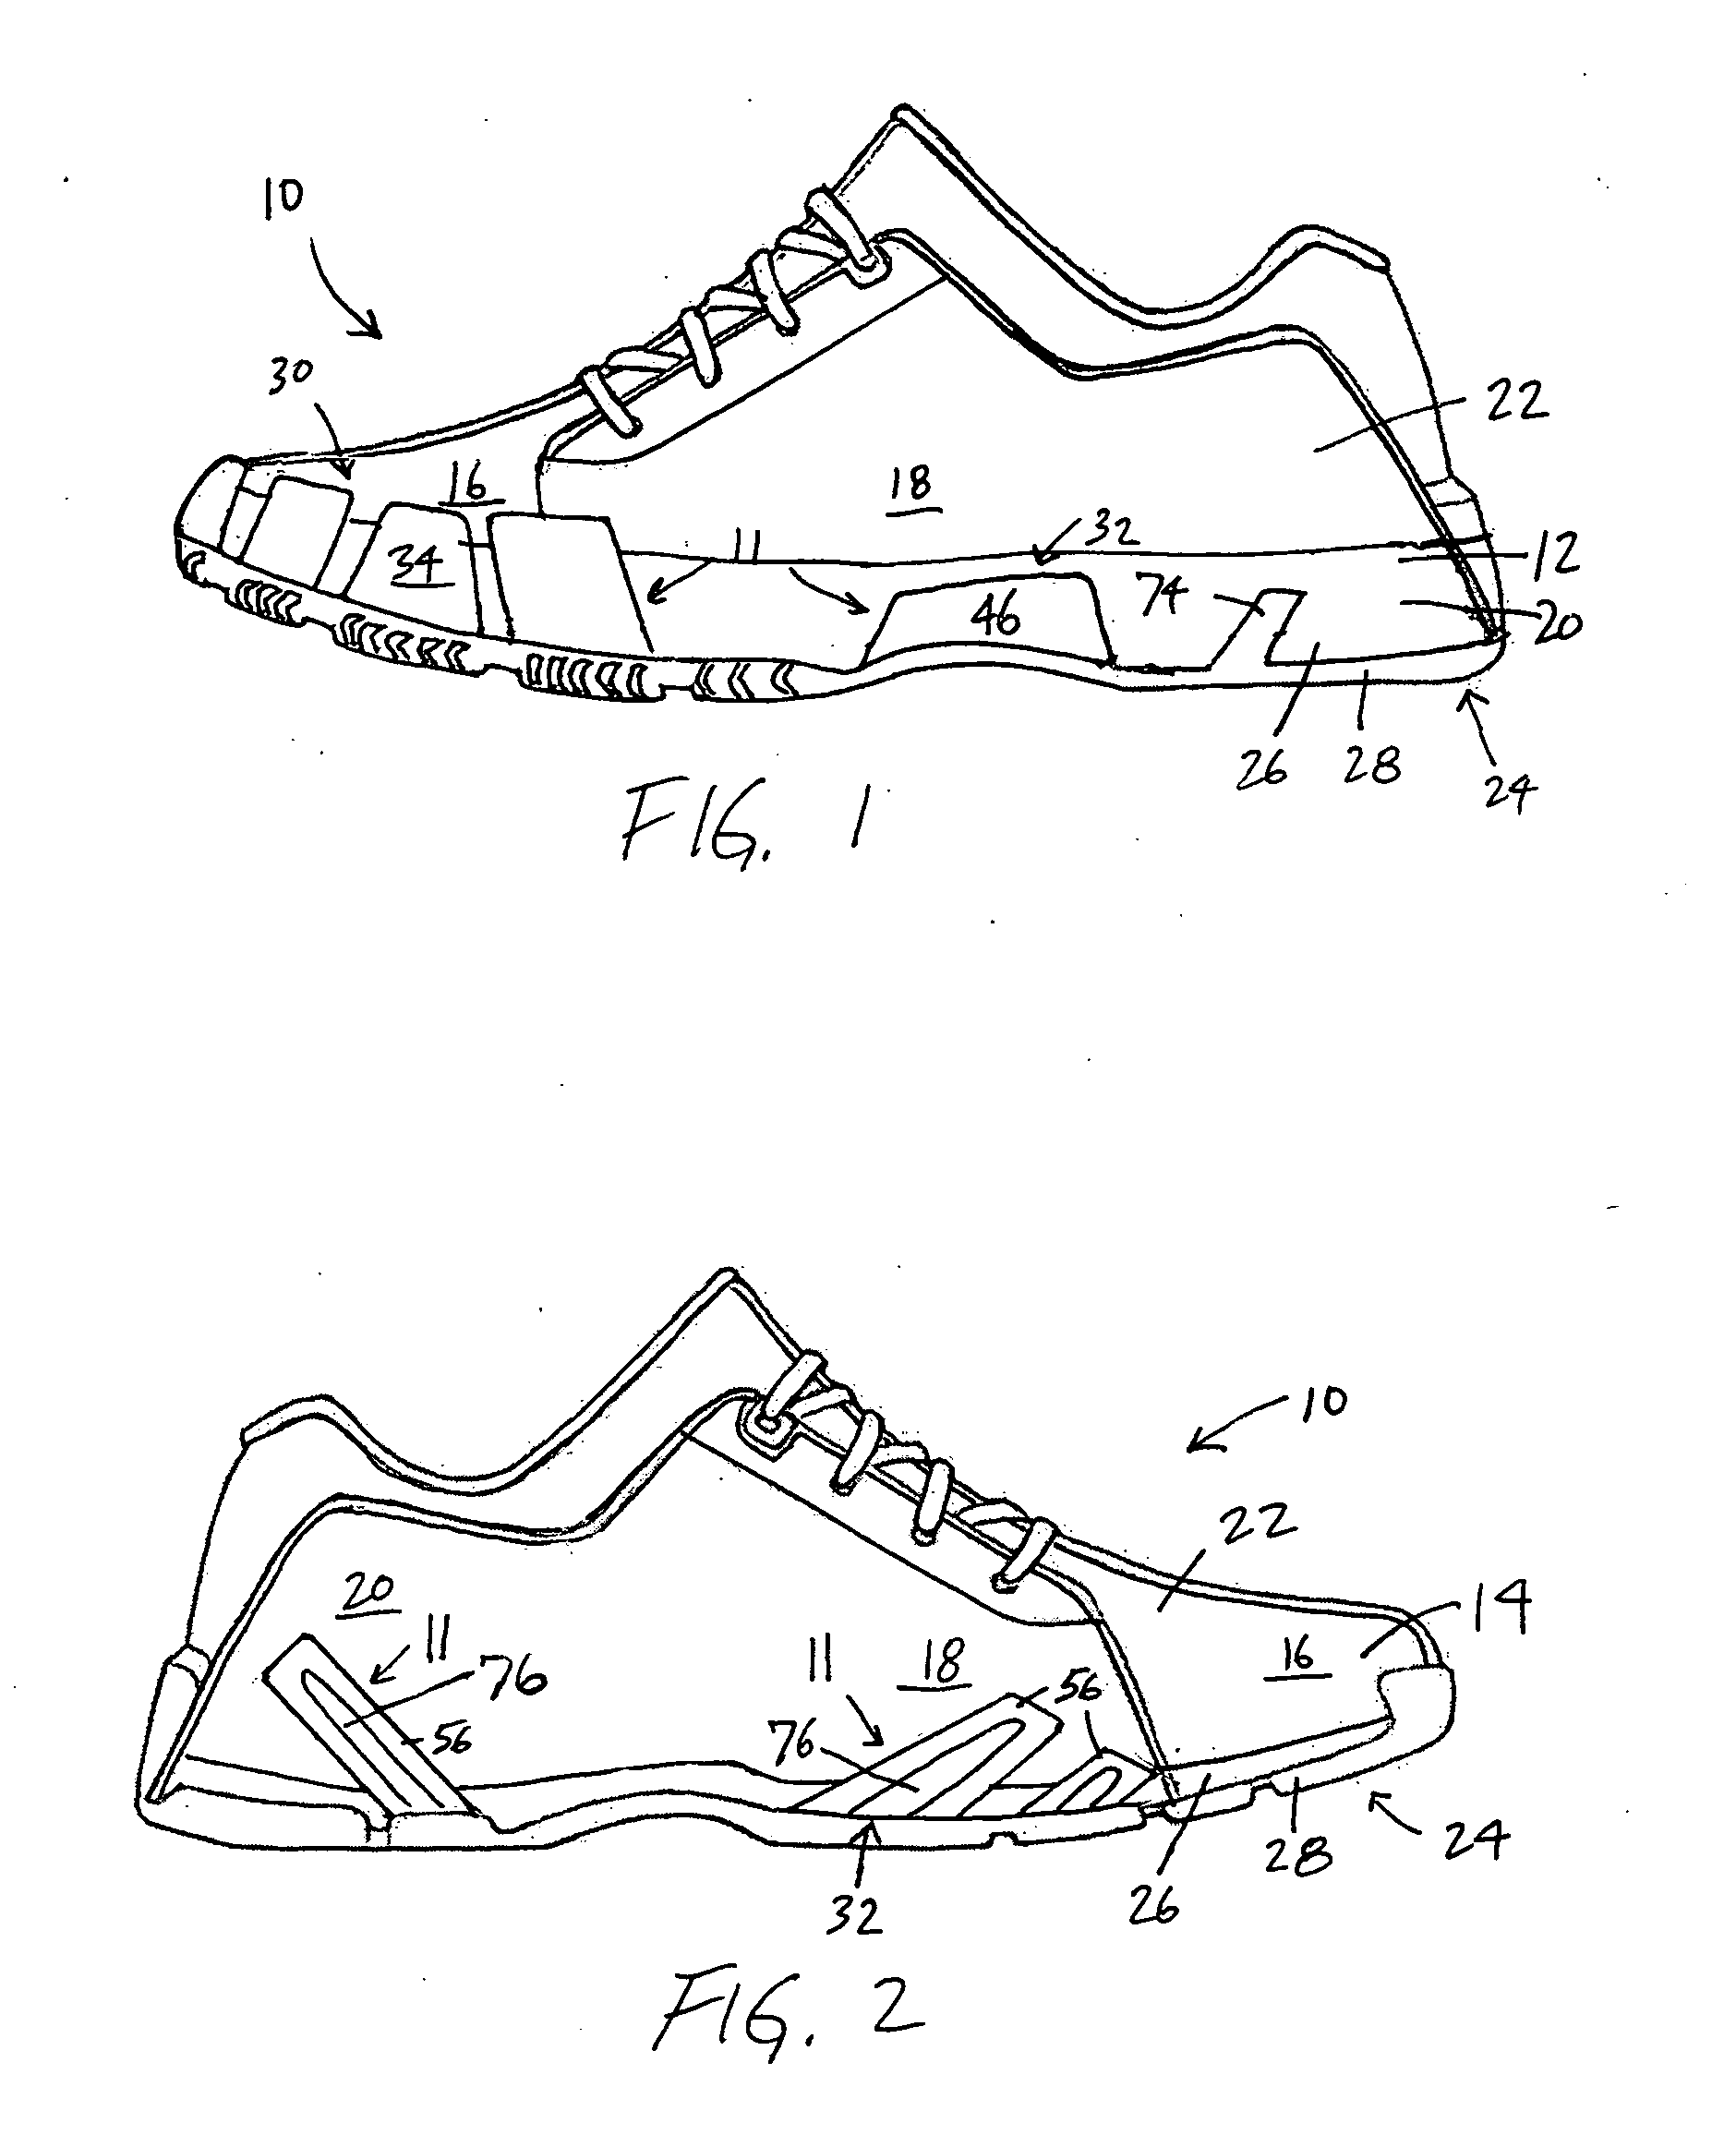 Article of footwear with sole plate